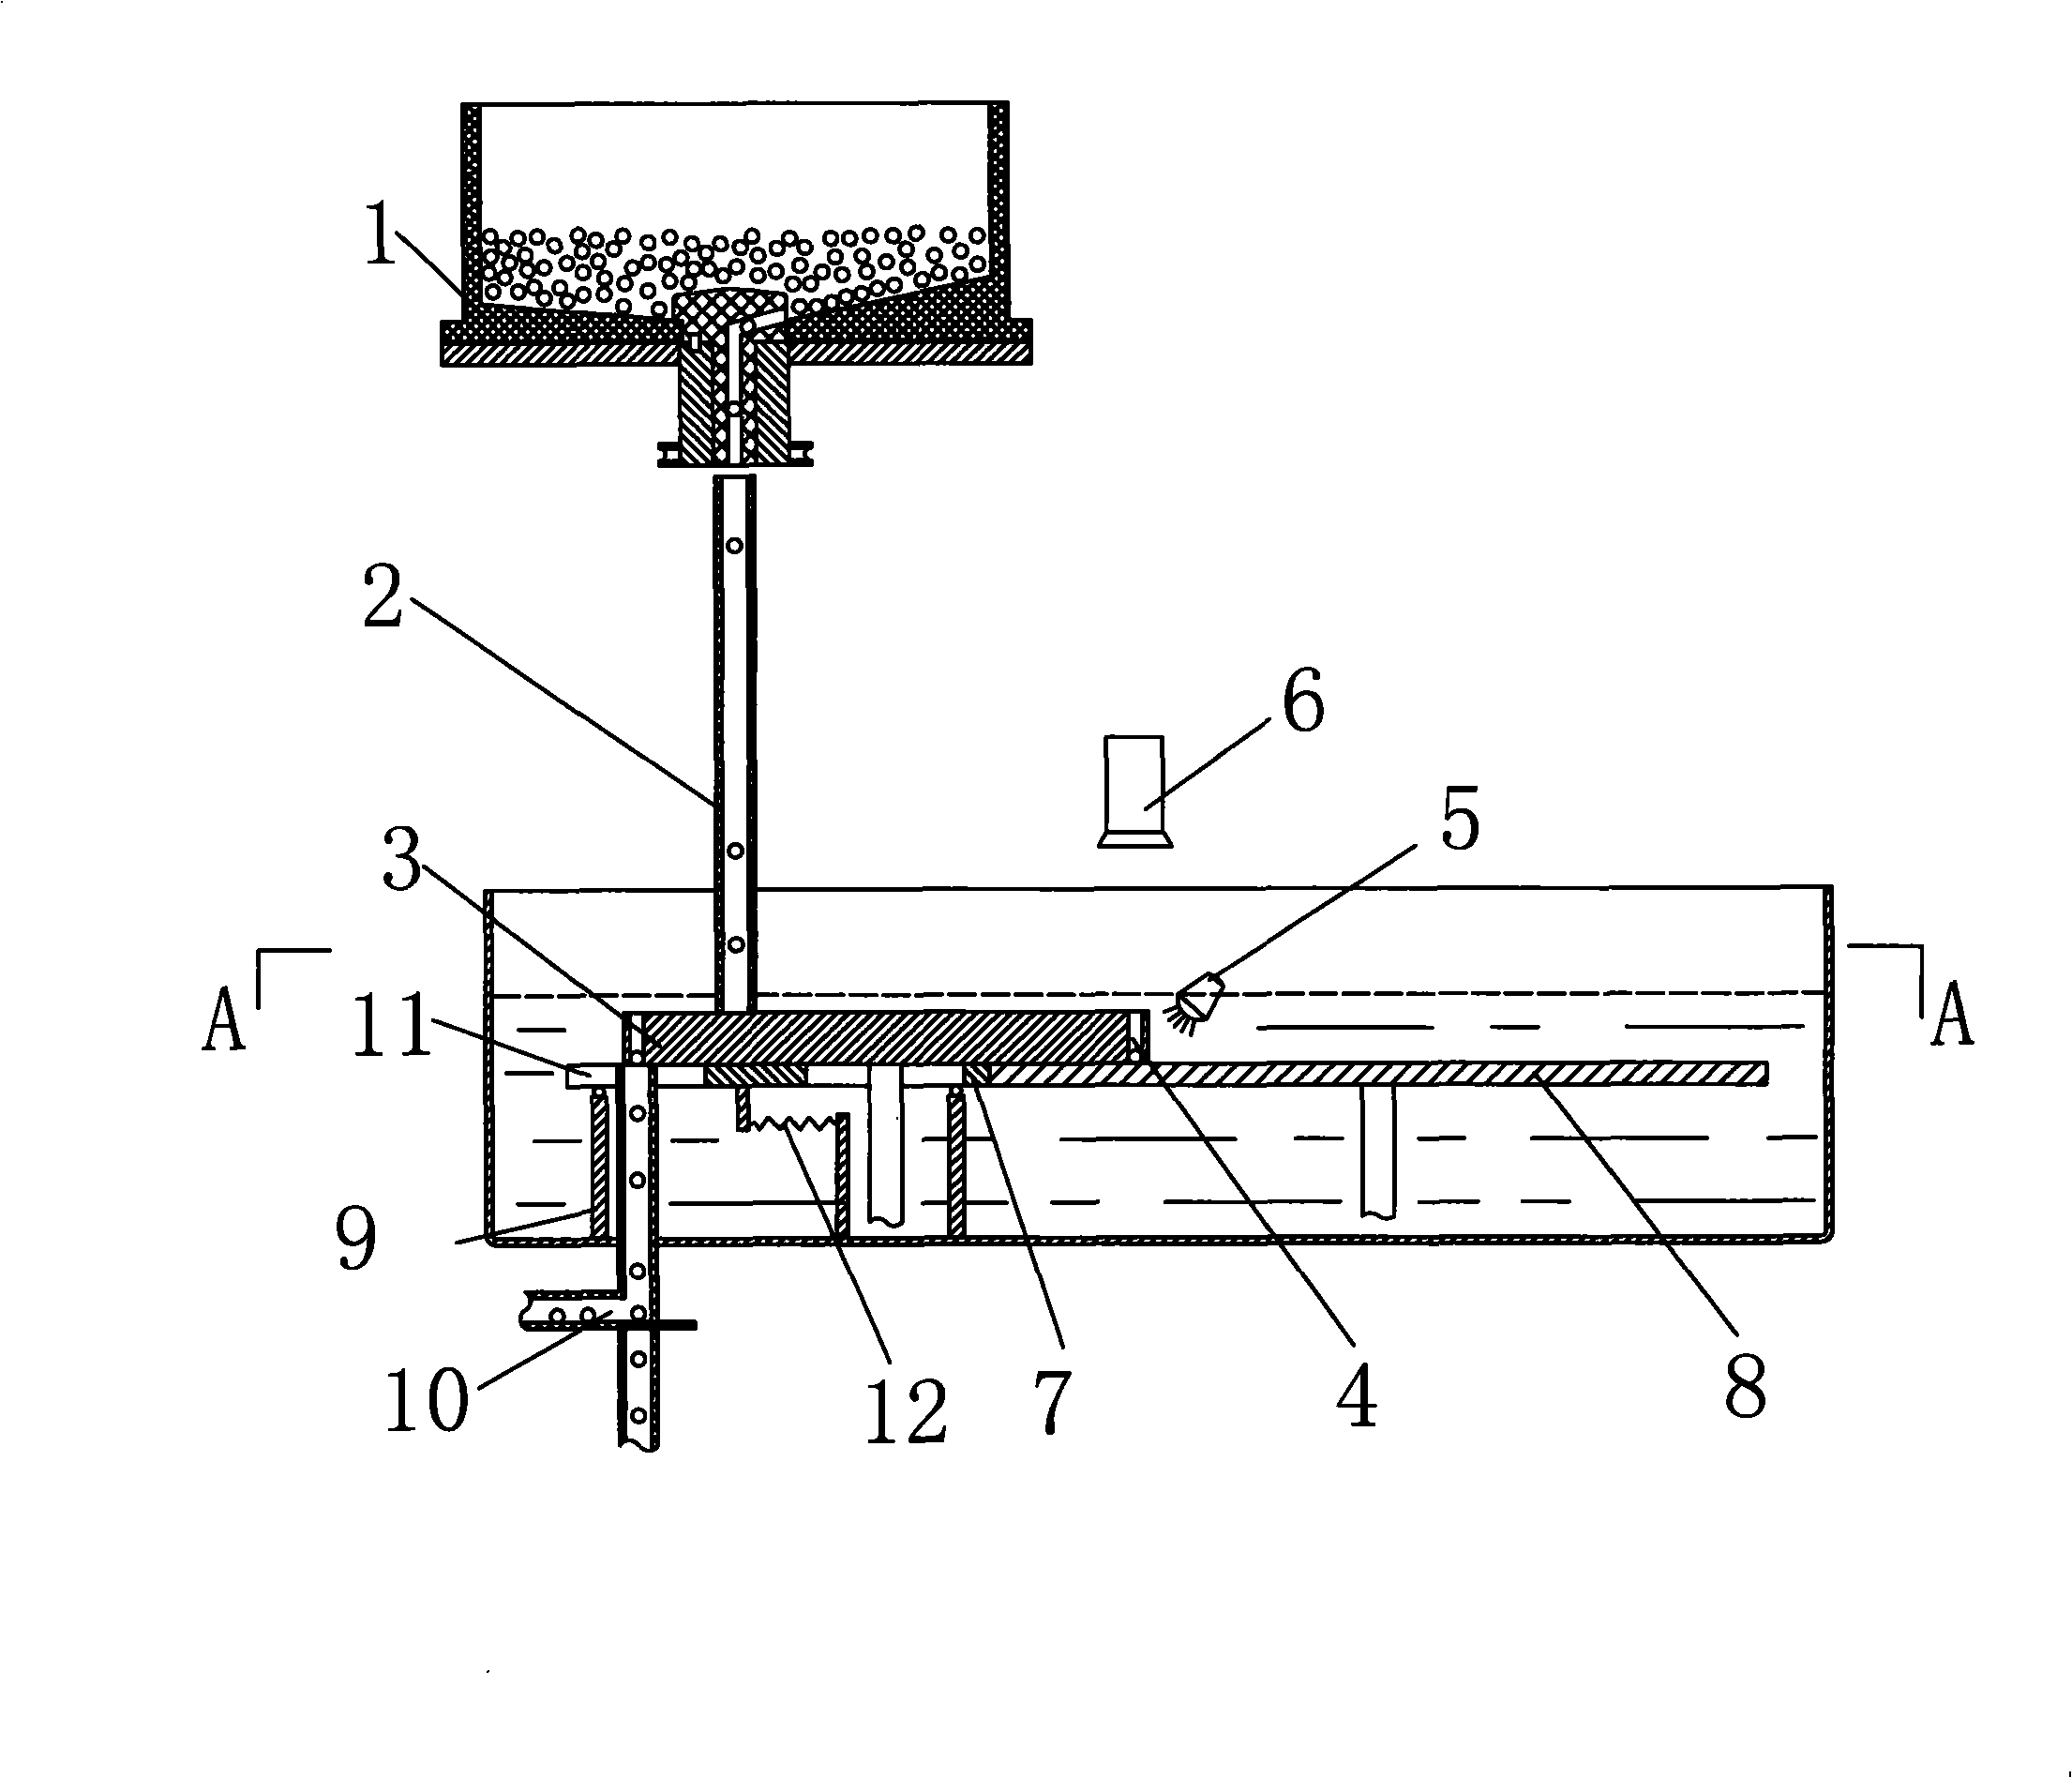 Steel ball surface defect detection apparatus